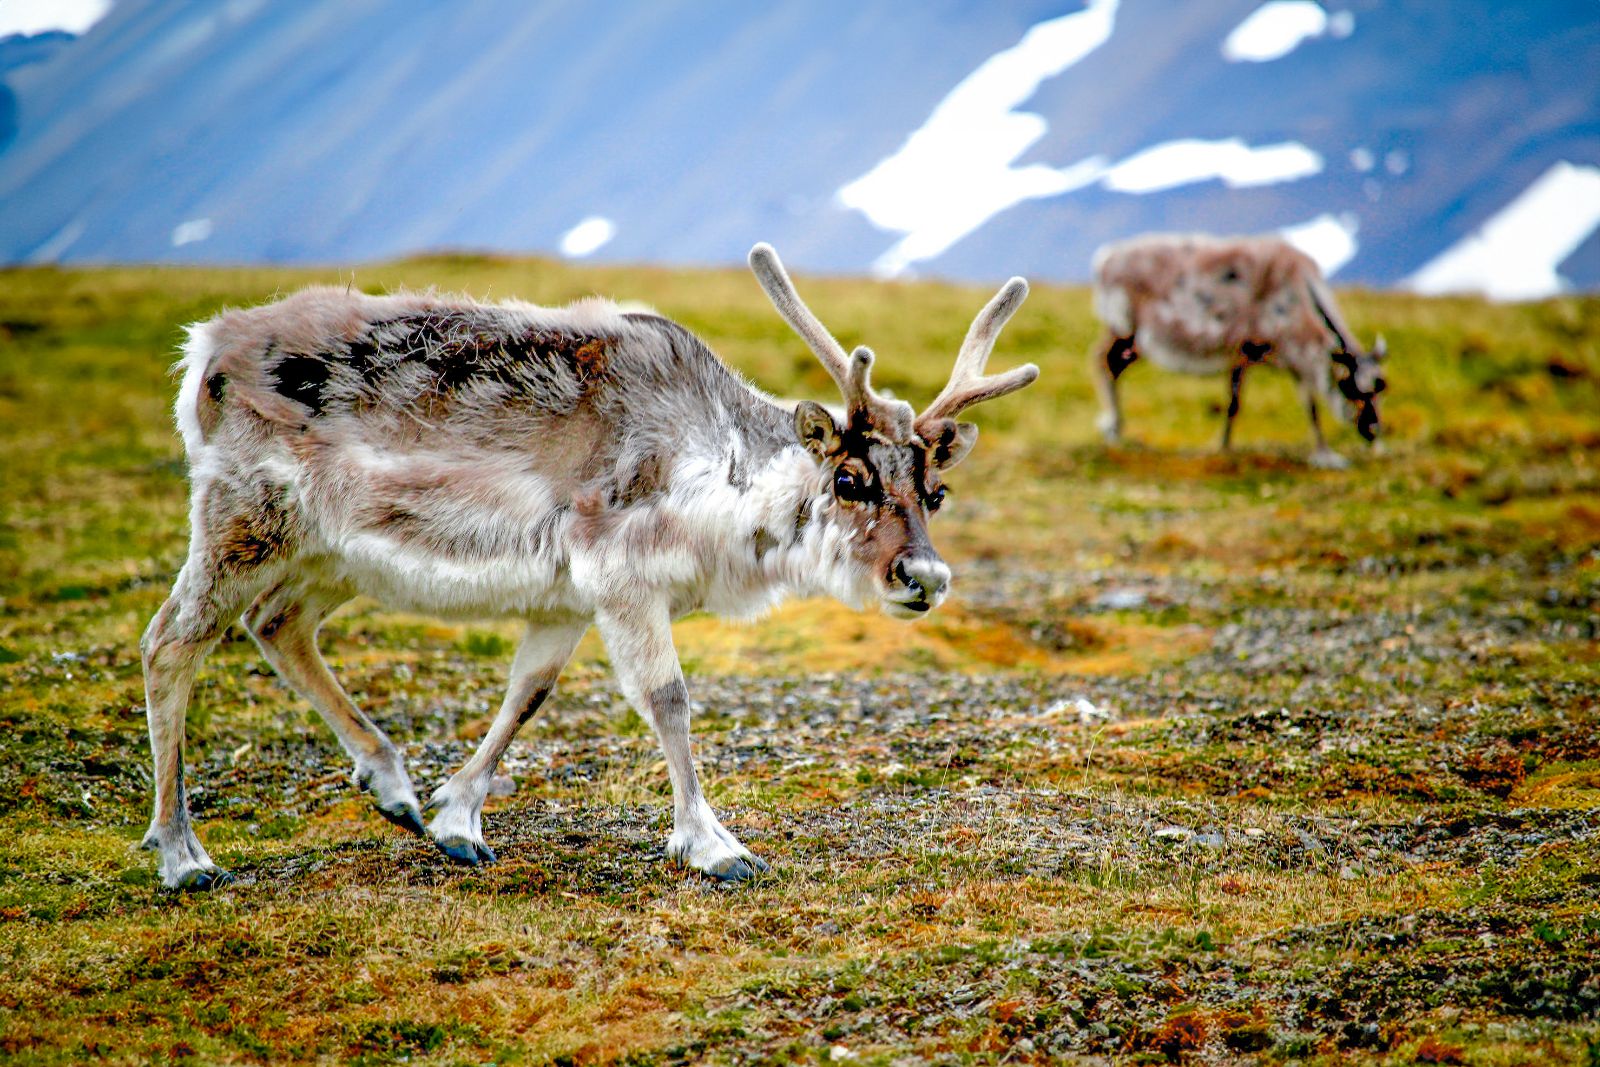 Reindeer spotted in Svalbard from SIlversea;s Silver Cloud cruise ship